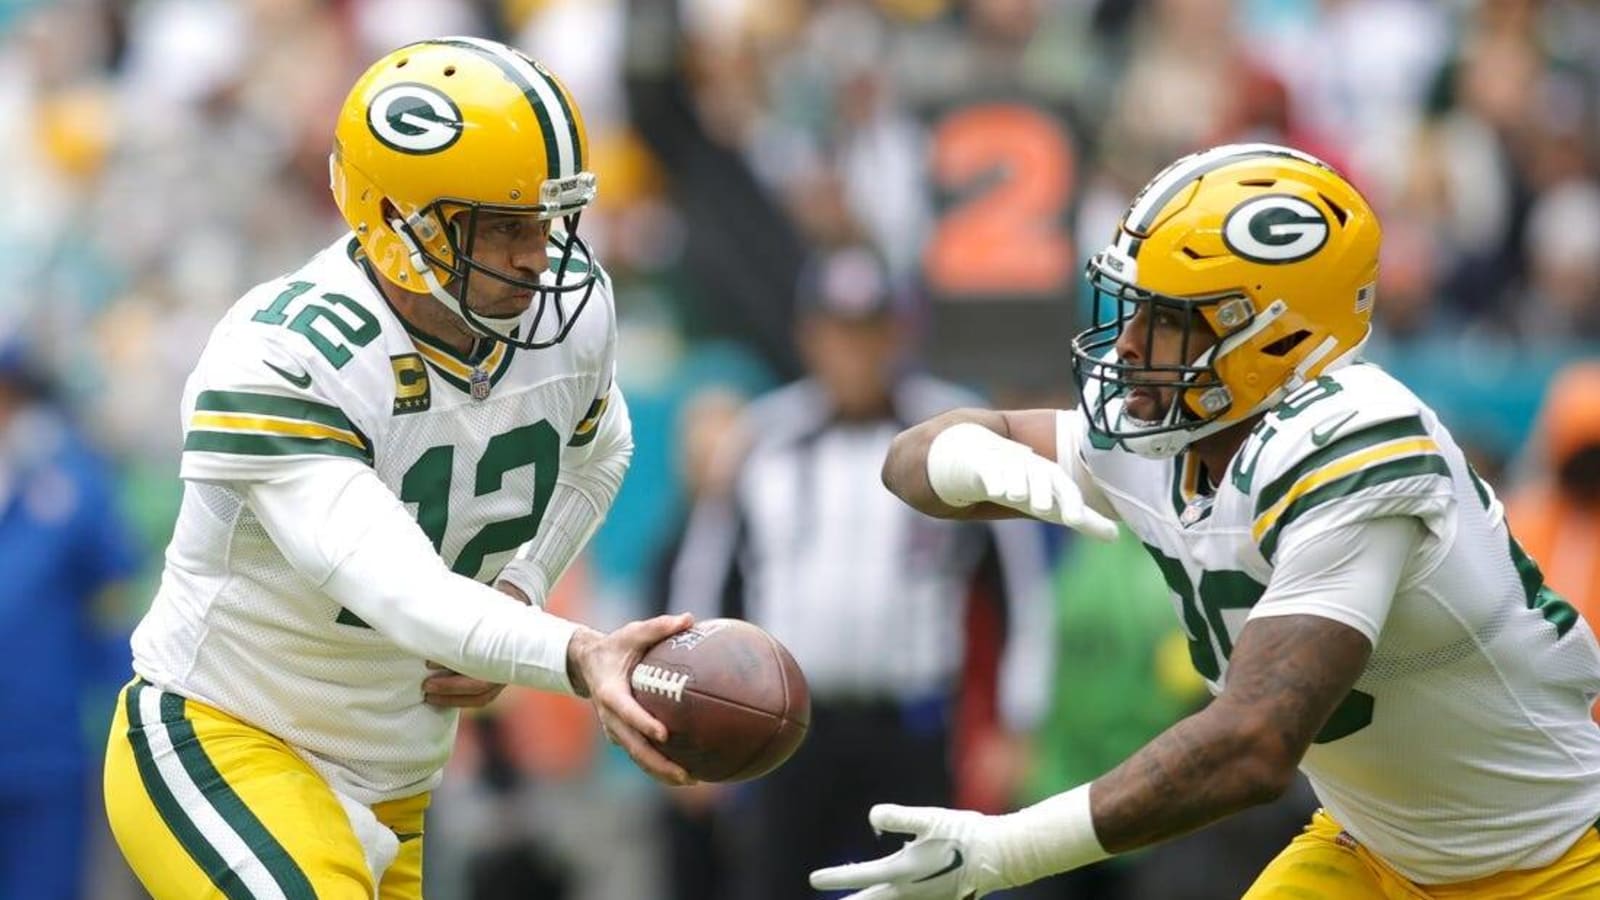 Late interceptions help Packers beat Dolphins